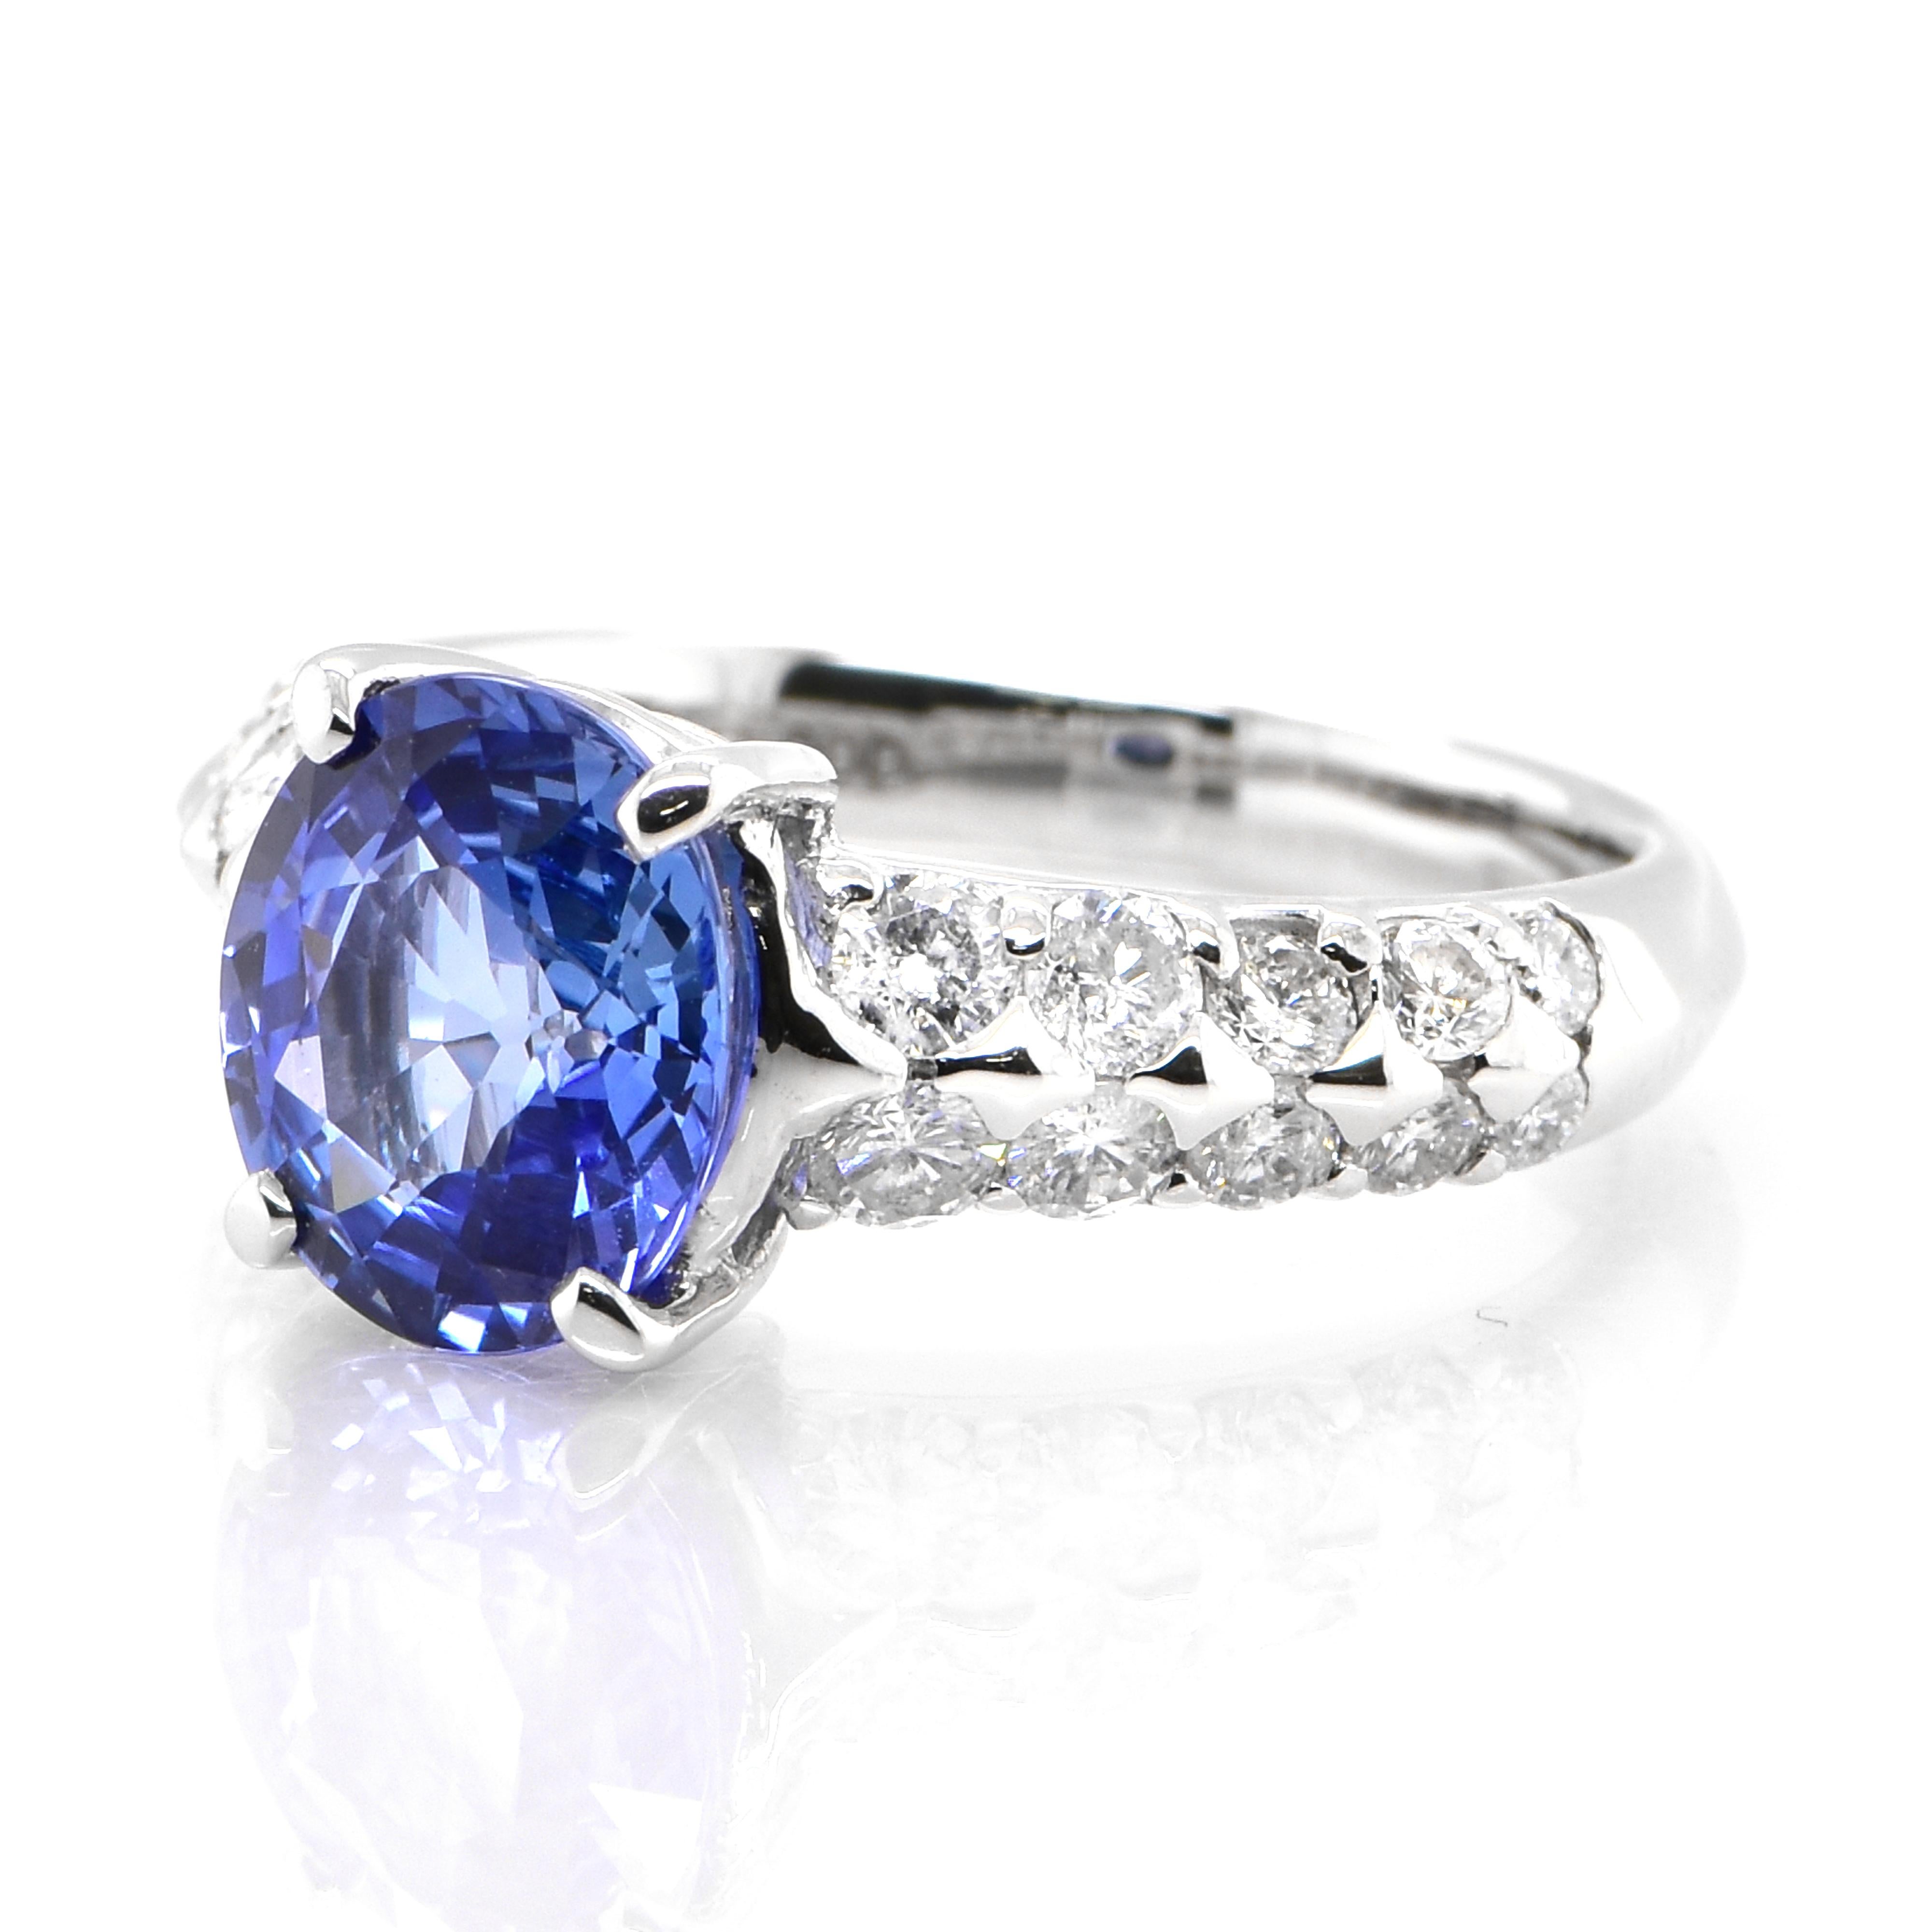 A beautiful ring featuring 2.17 Carat Natural Blue Sapphire and 0.70 Carats Diamond Accents set in Platinum. Sapphires have extraordinary durability - they excel in hardness as well as toughness and durability making them very popular in jewelry.